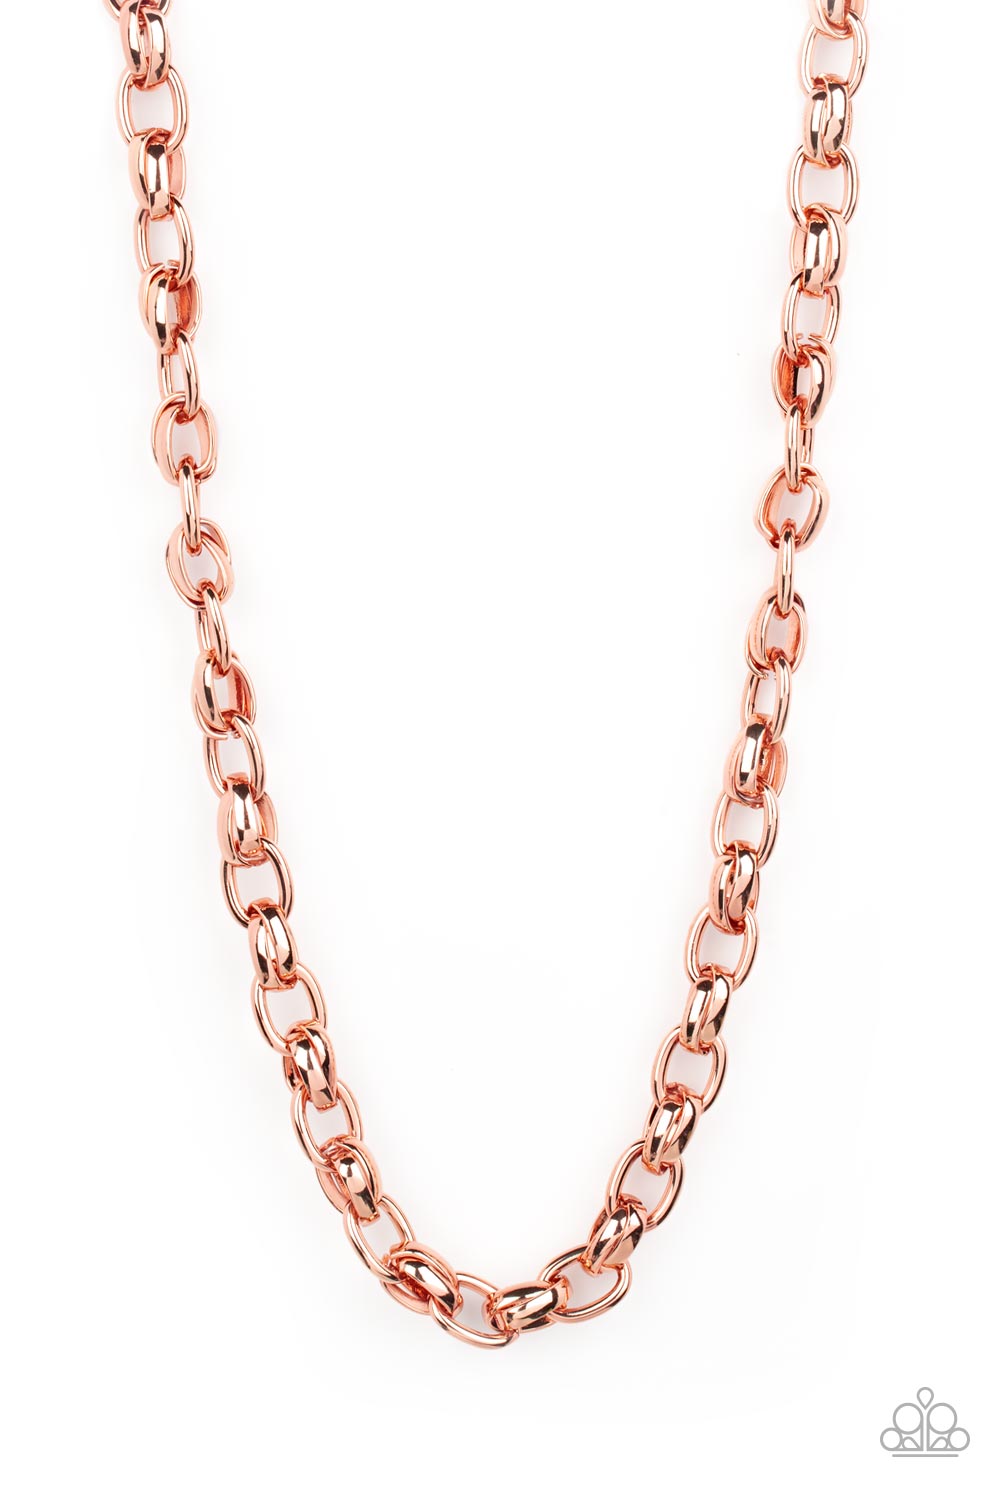 Rookie of the Year - Copper Link Necklaces a chunky collection of bold shiny copper links interlock across the chest, creating an intense industrial centerpiece. Features an adjustable clasp closure.  Sold as one individual necklace.